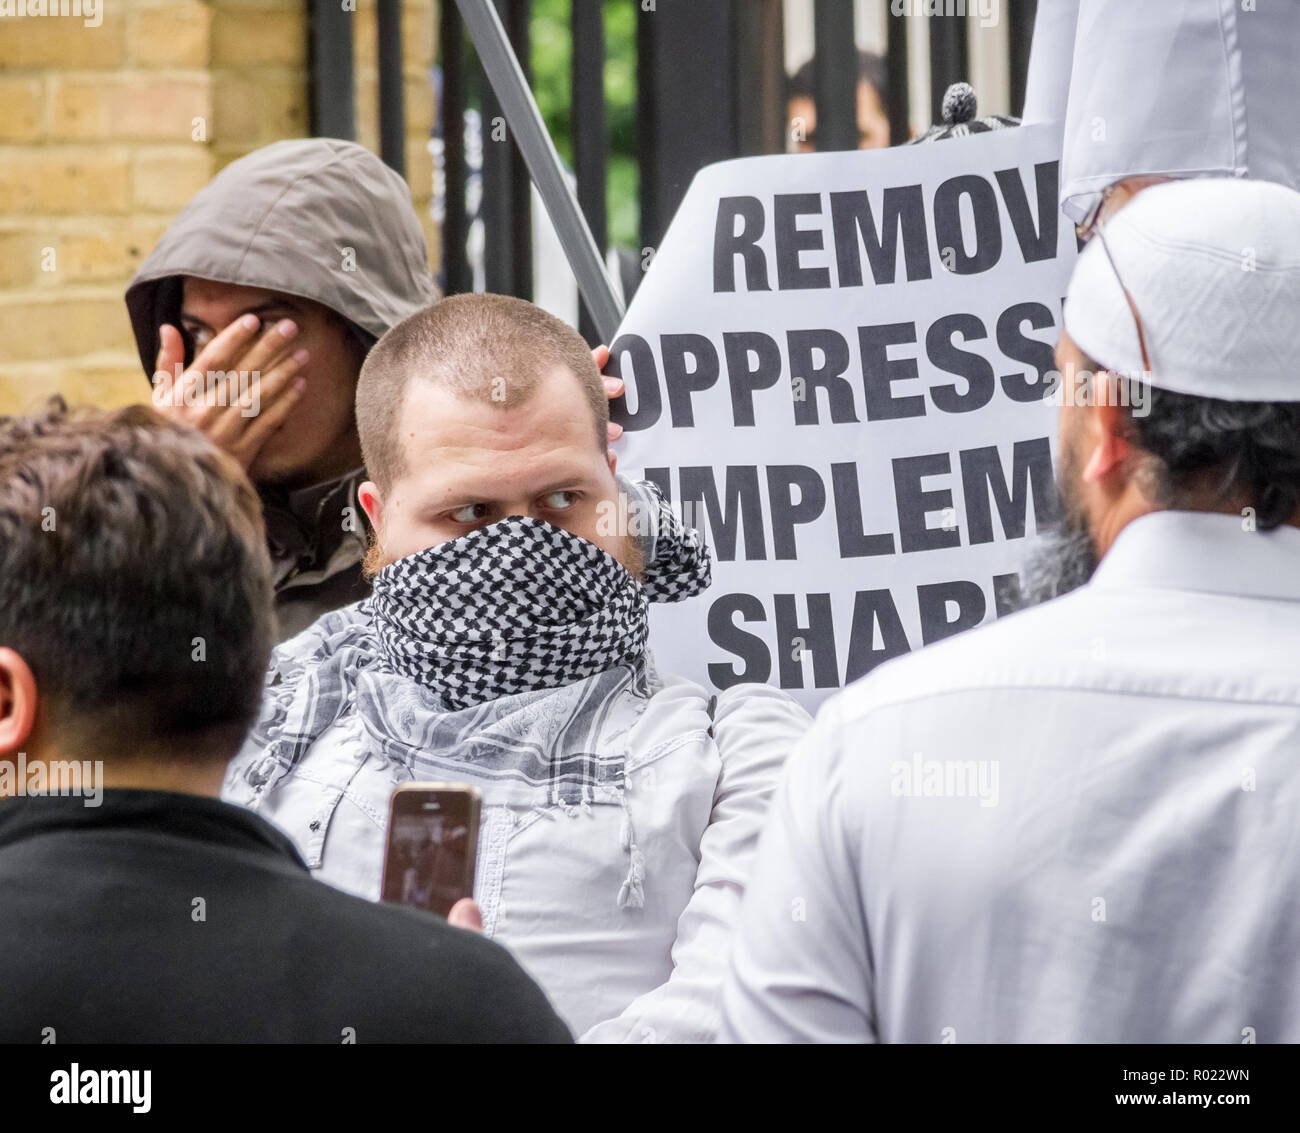 London, UK. 30th May, 2014. File Image from 30-05-2014: Lewis Ludlow, 26, from Rochester in Kent, a Muslim convert (pic centre, face covering) also used the name Ali Hussain, is due to be sentenced for plotting an Islamic State-inspired attack on Oxford Street in which he hoped to kill 100 people. Ludlow is seen here in 2014 outside the London Central Mosque during a protest organised by radical cleric Anjem Choudary and his banned Al-Muhajiroun (ALM) group. Credit: Guy Corbishley/Alamy Live News Stock Photo